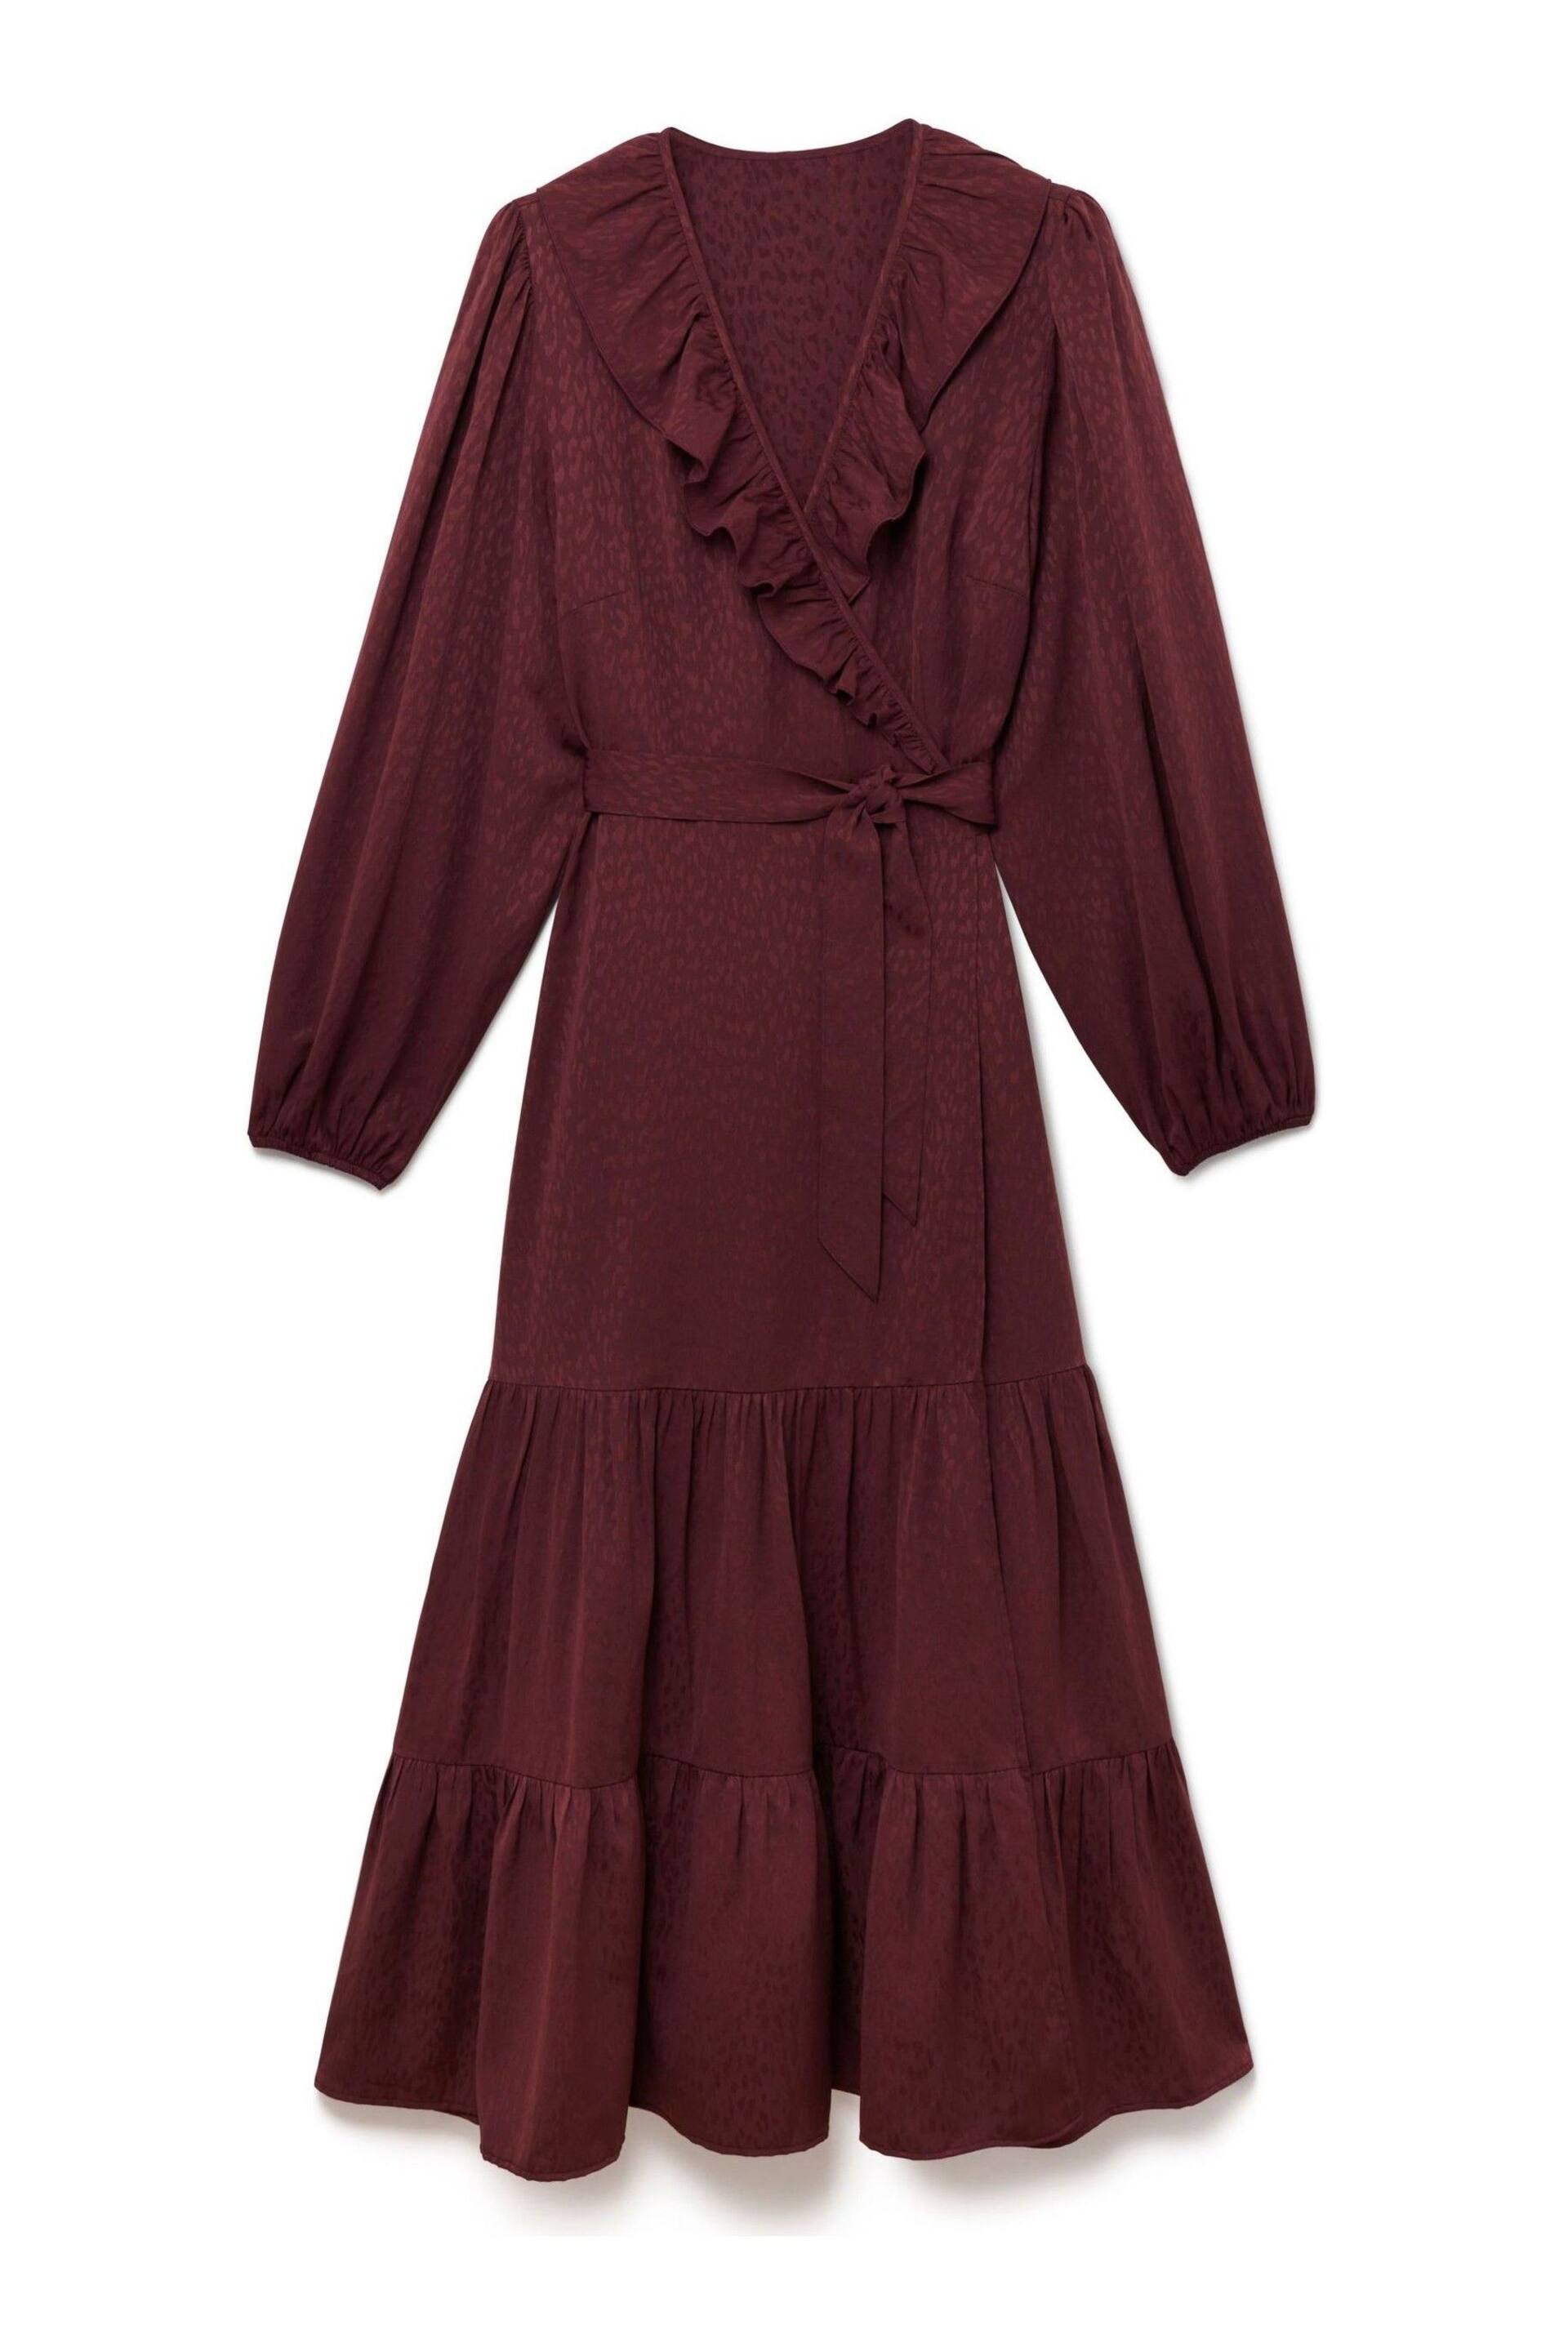 Another Sunday Wrap Over Midi Dress With Ruffle Detail - Image 4 of 7